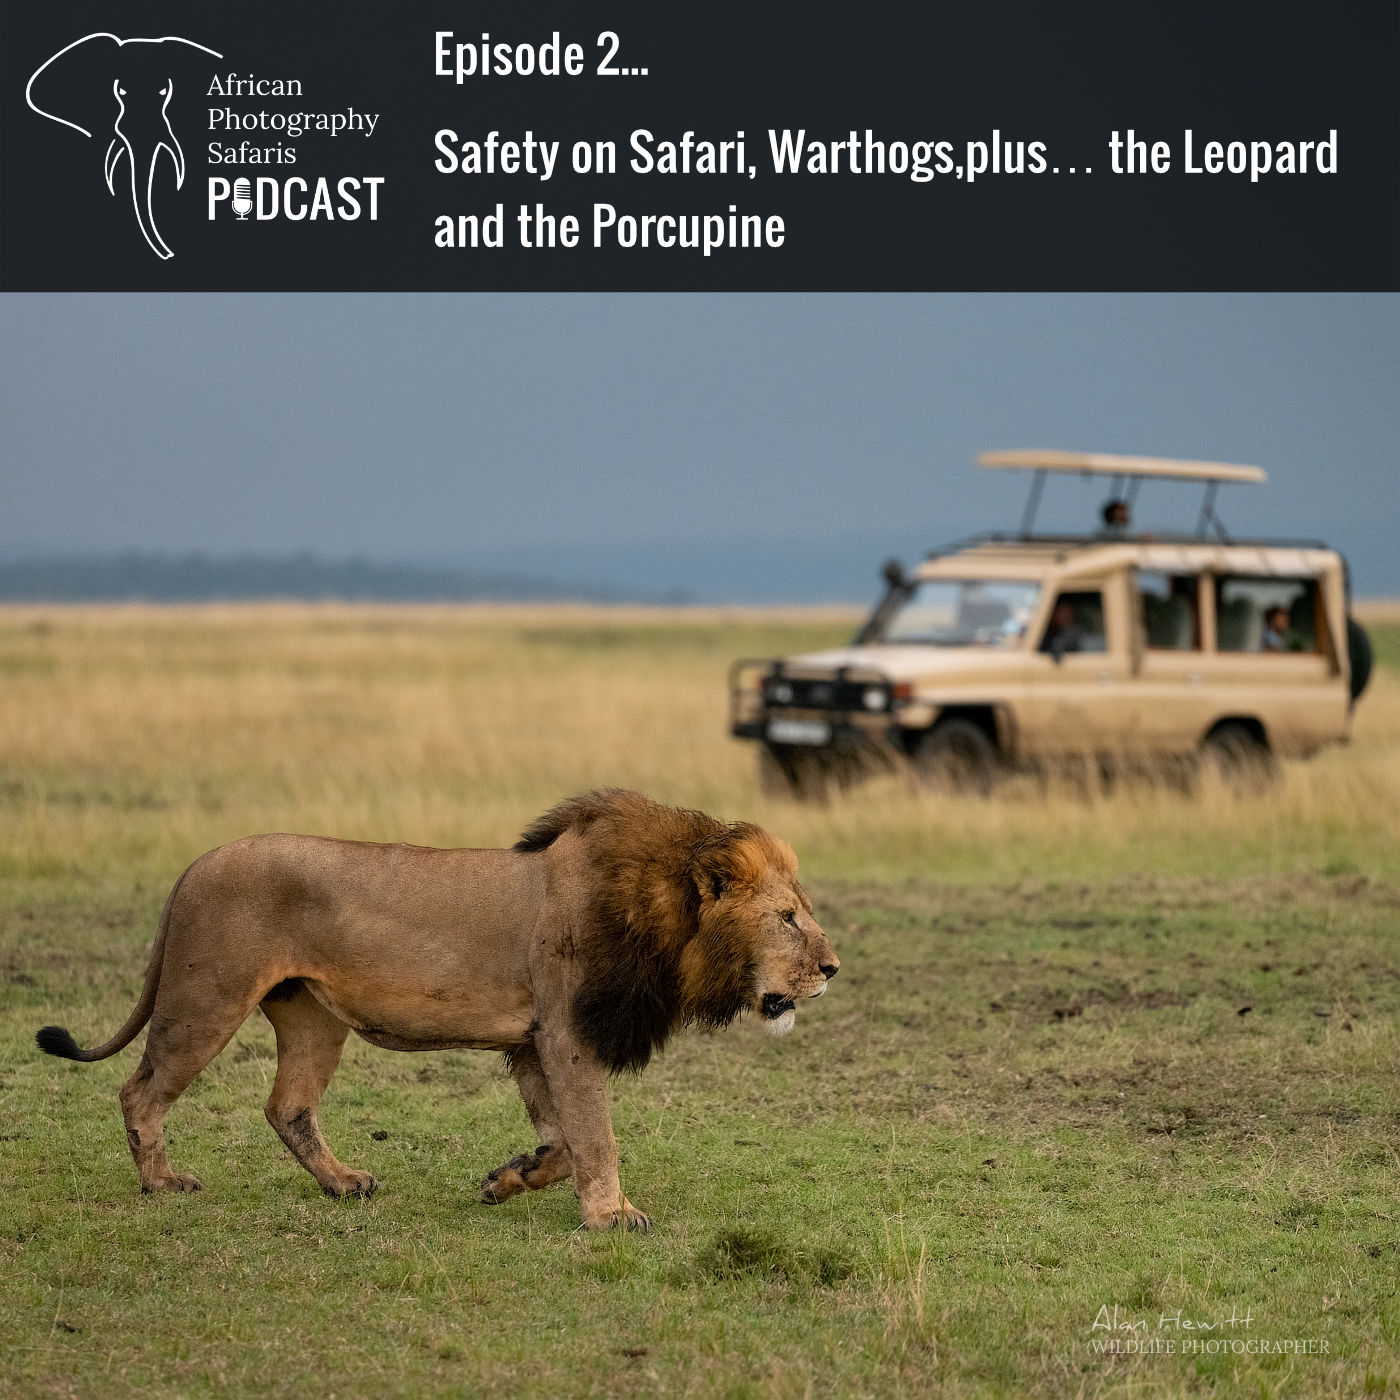 African Photography Safaris Podcast. Episode 2 - Warthogs. The leopard and the porcupine and safari safaety